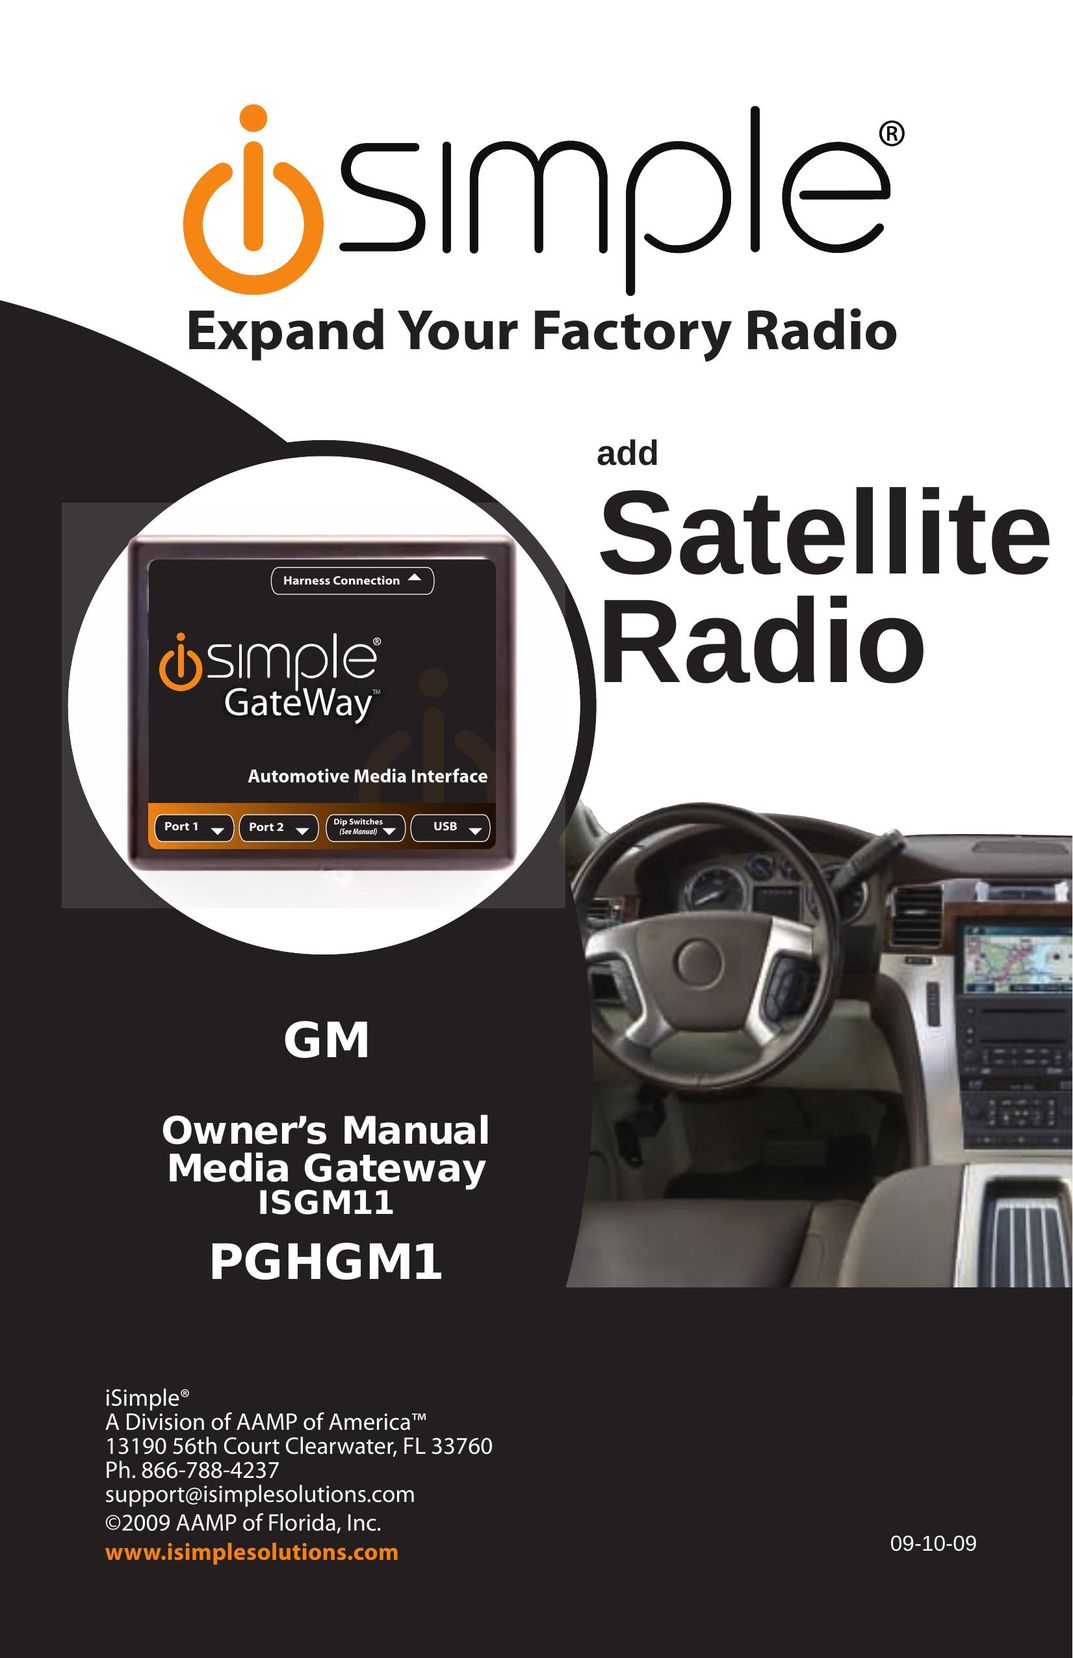 iSimple PGHGM1 Car Satellite Radio System User Manual (Page 1)